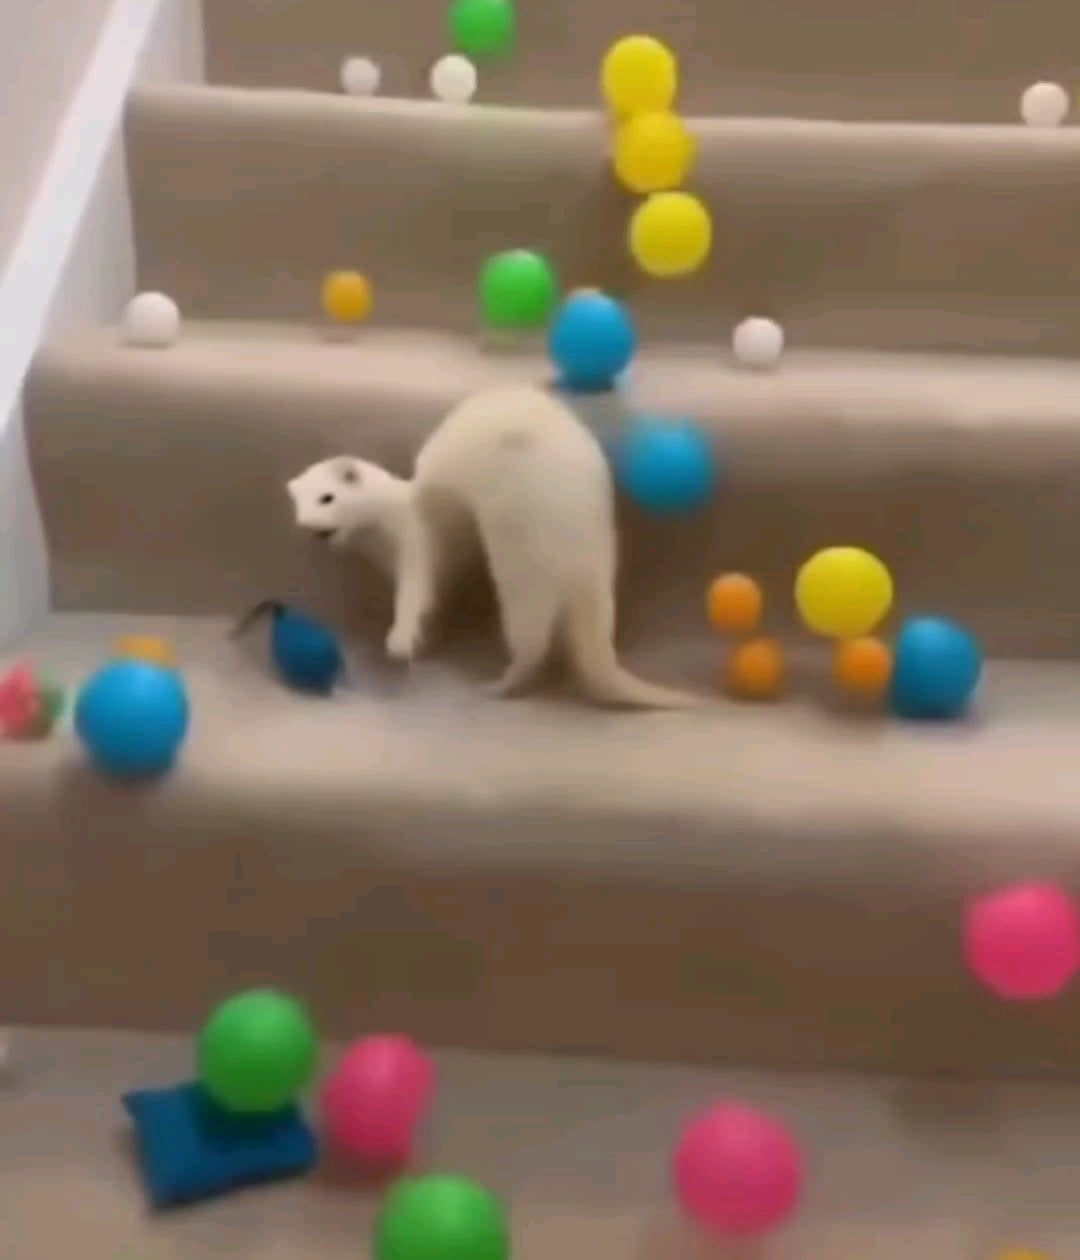 Surprising a deaf ermine with all her favourite balls